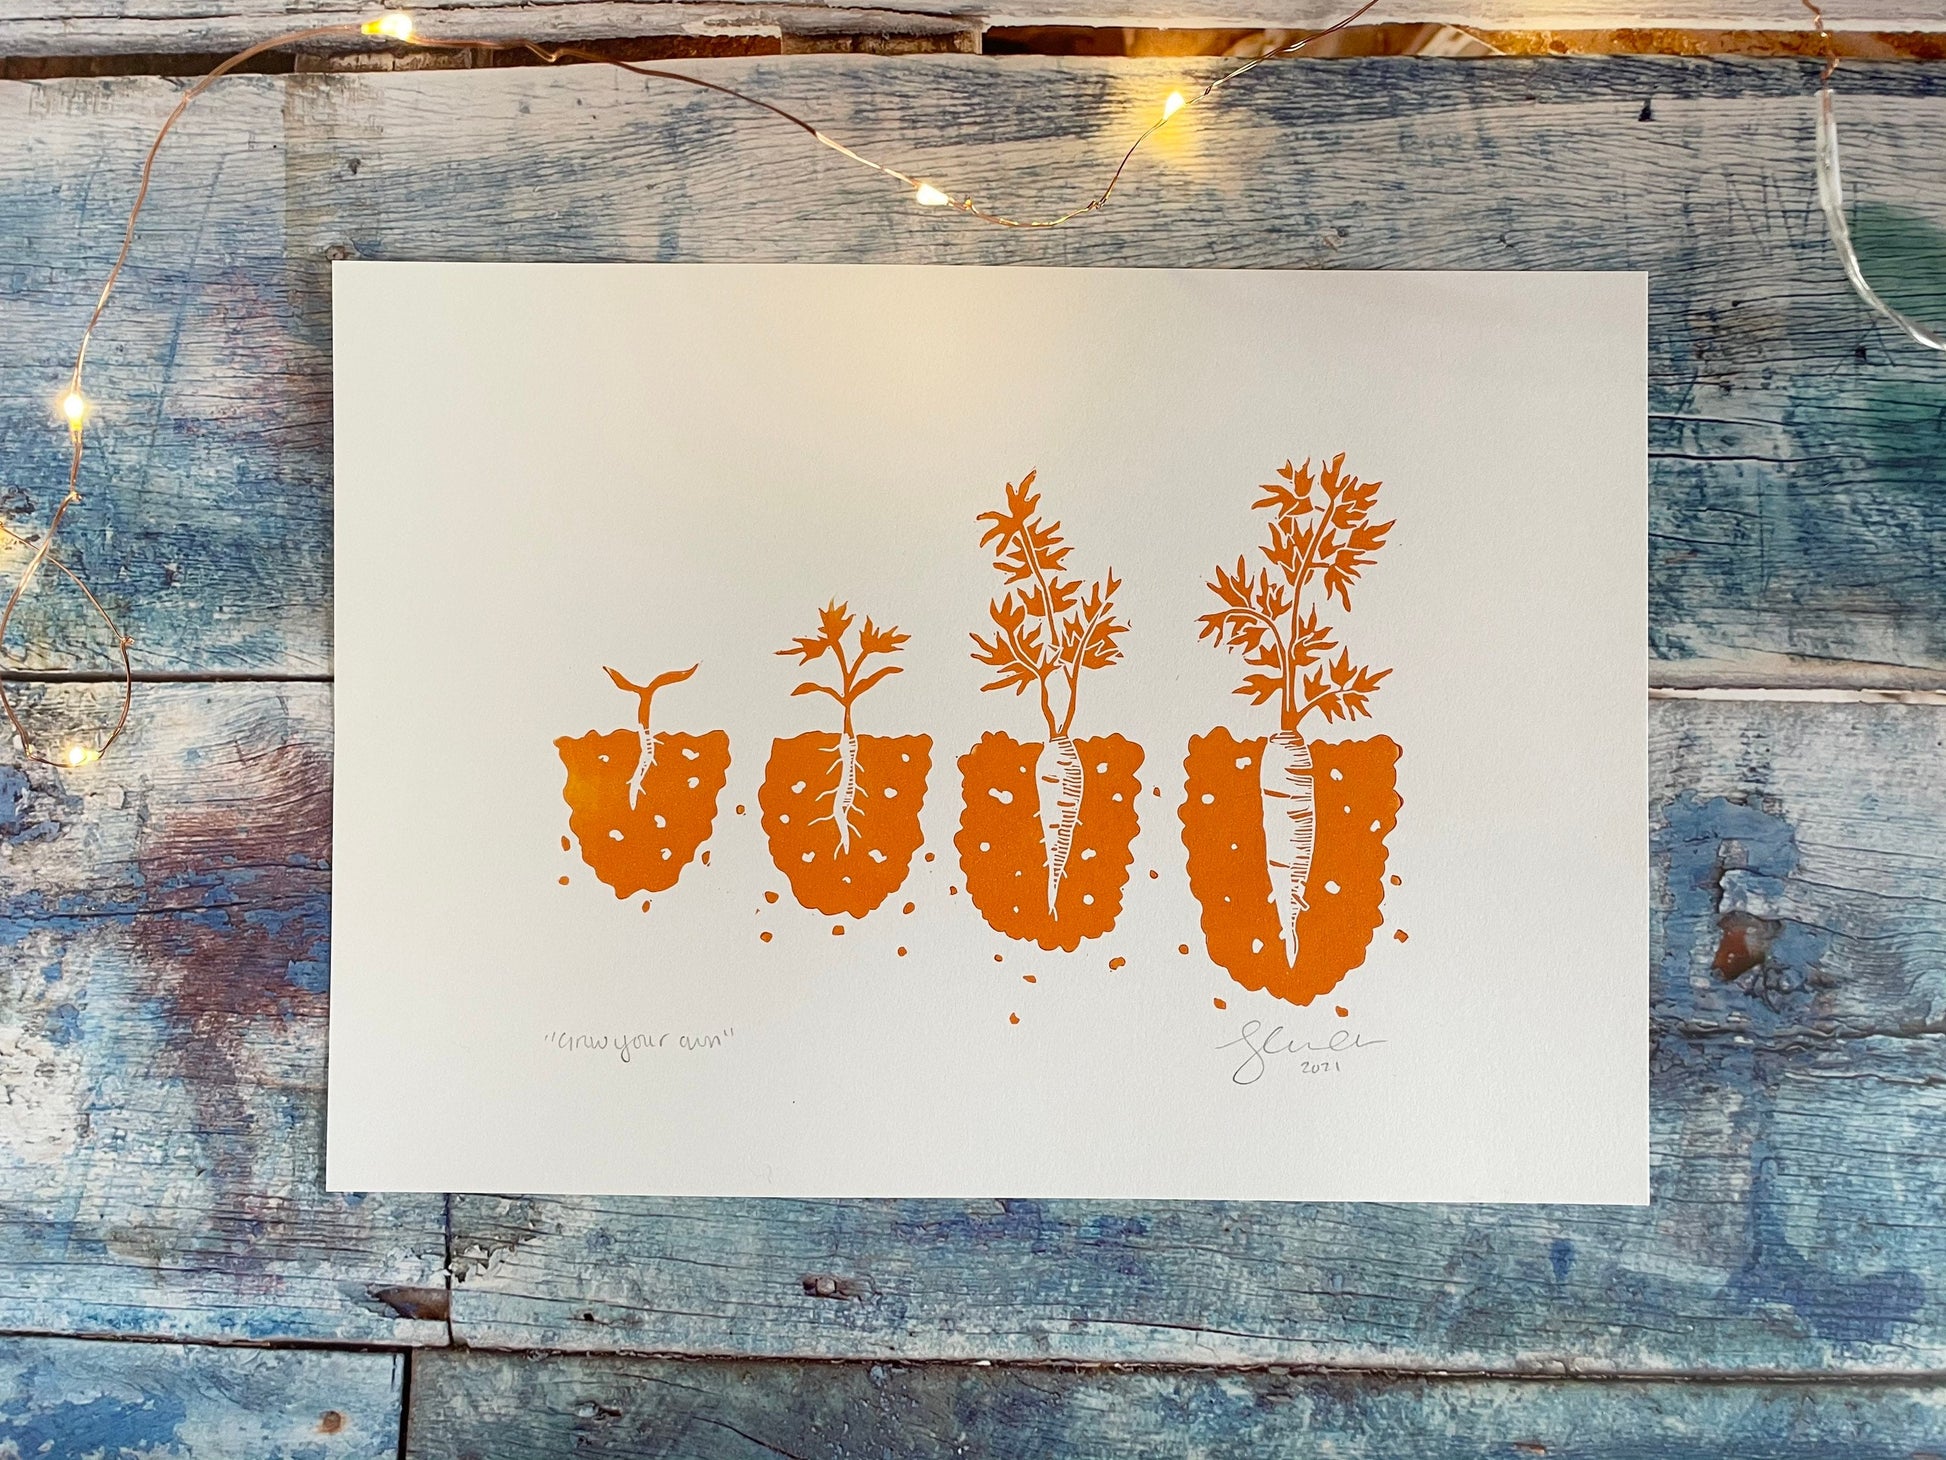 A lino print showing the different stages of a carrot growing from seedling to ready to pick in orange